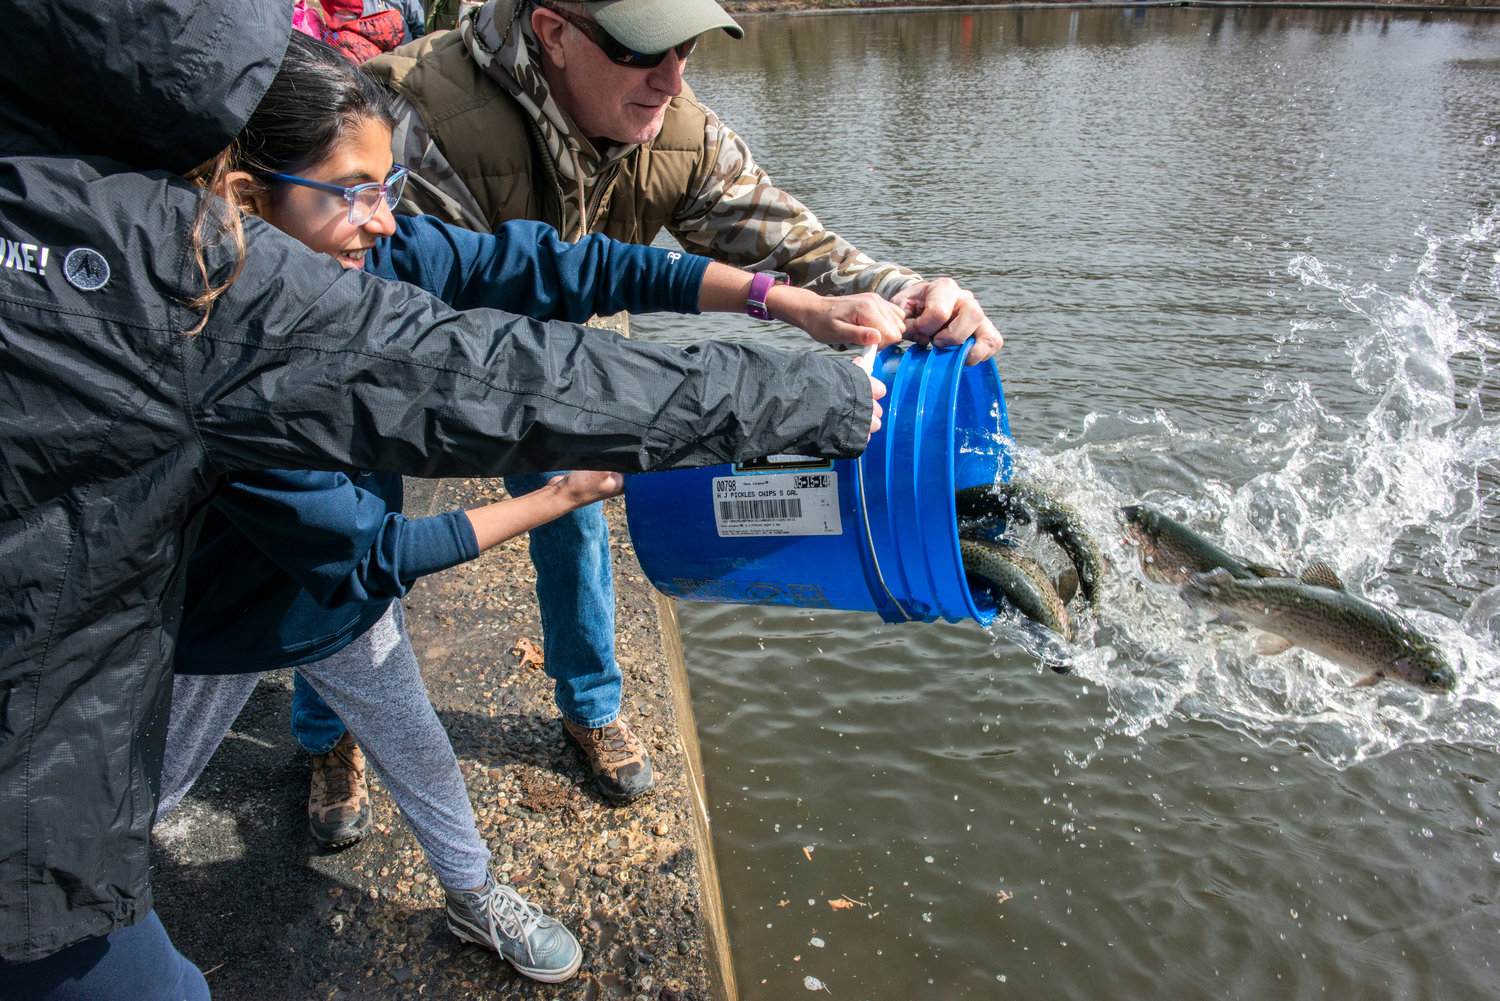 Students get assistance in releasing fish.